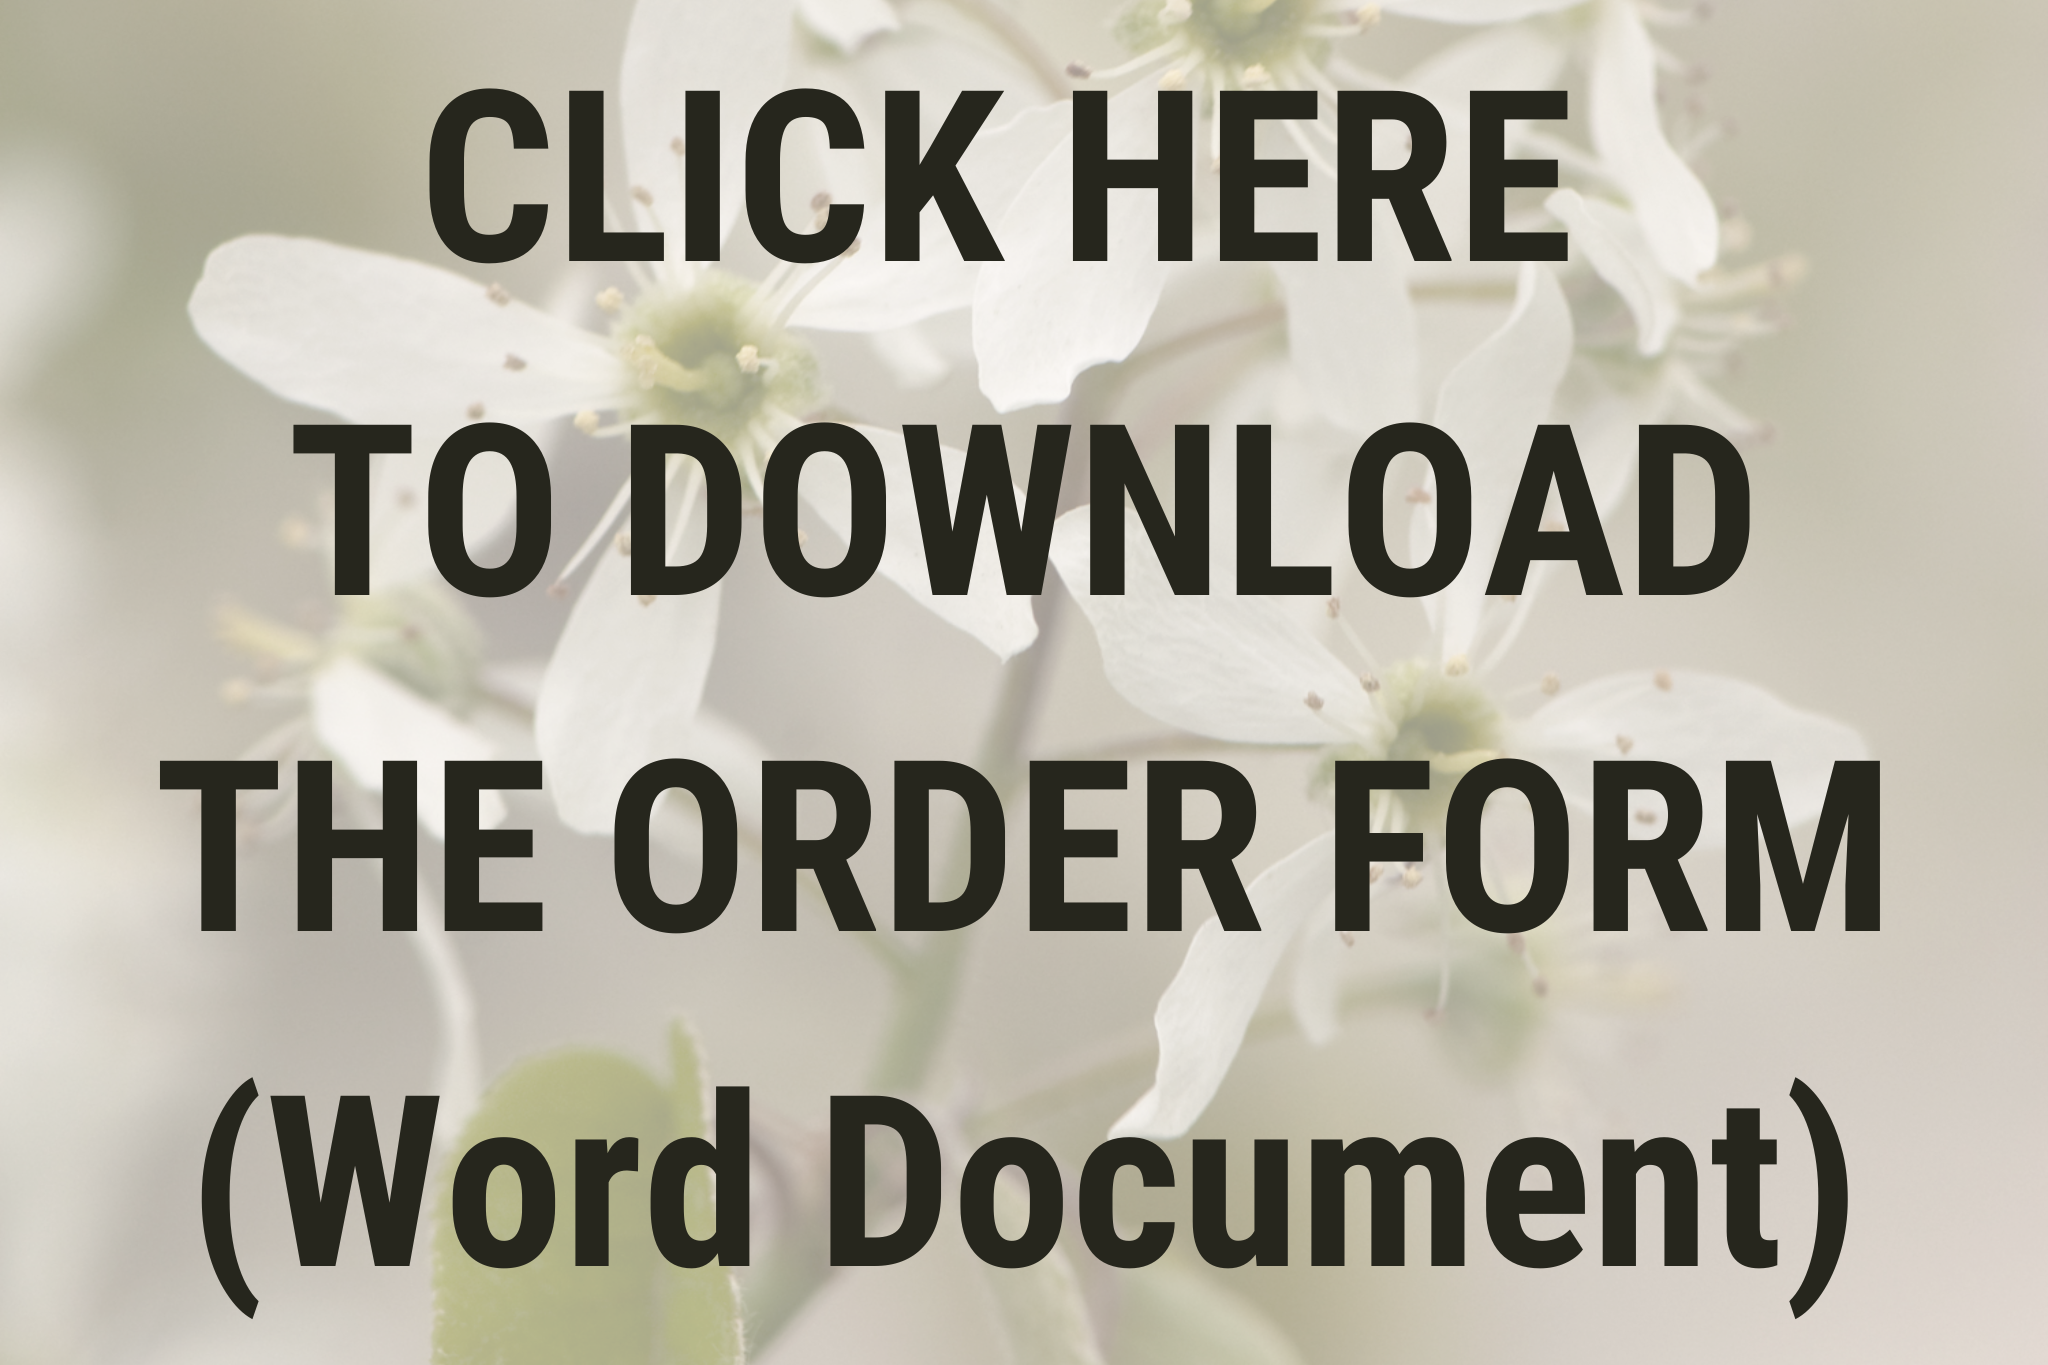 CLICK-HERE-TO-DOWNLOAD-THE-ORDER-FORM-4.png